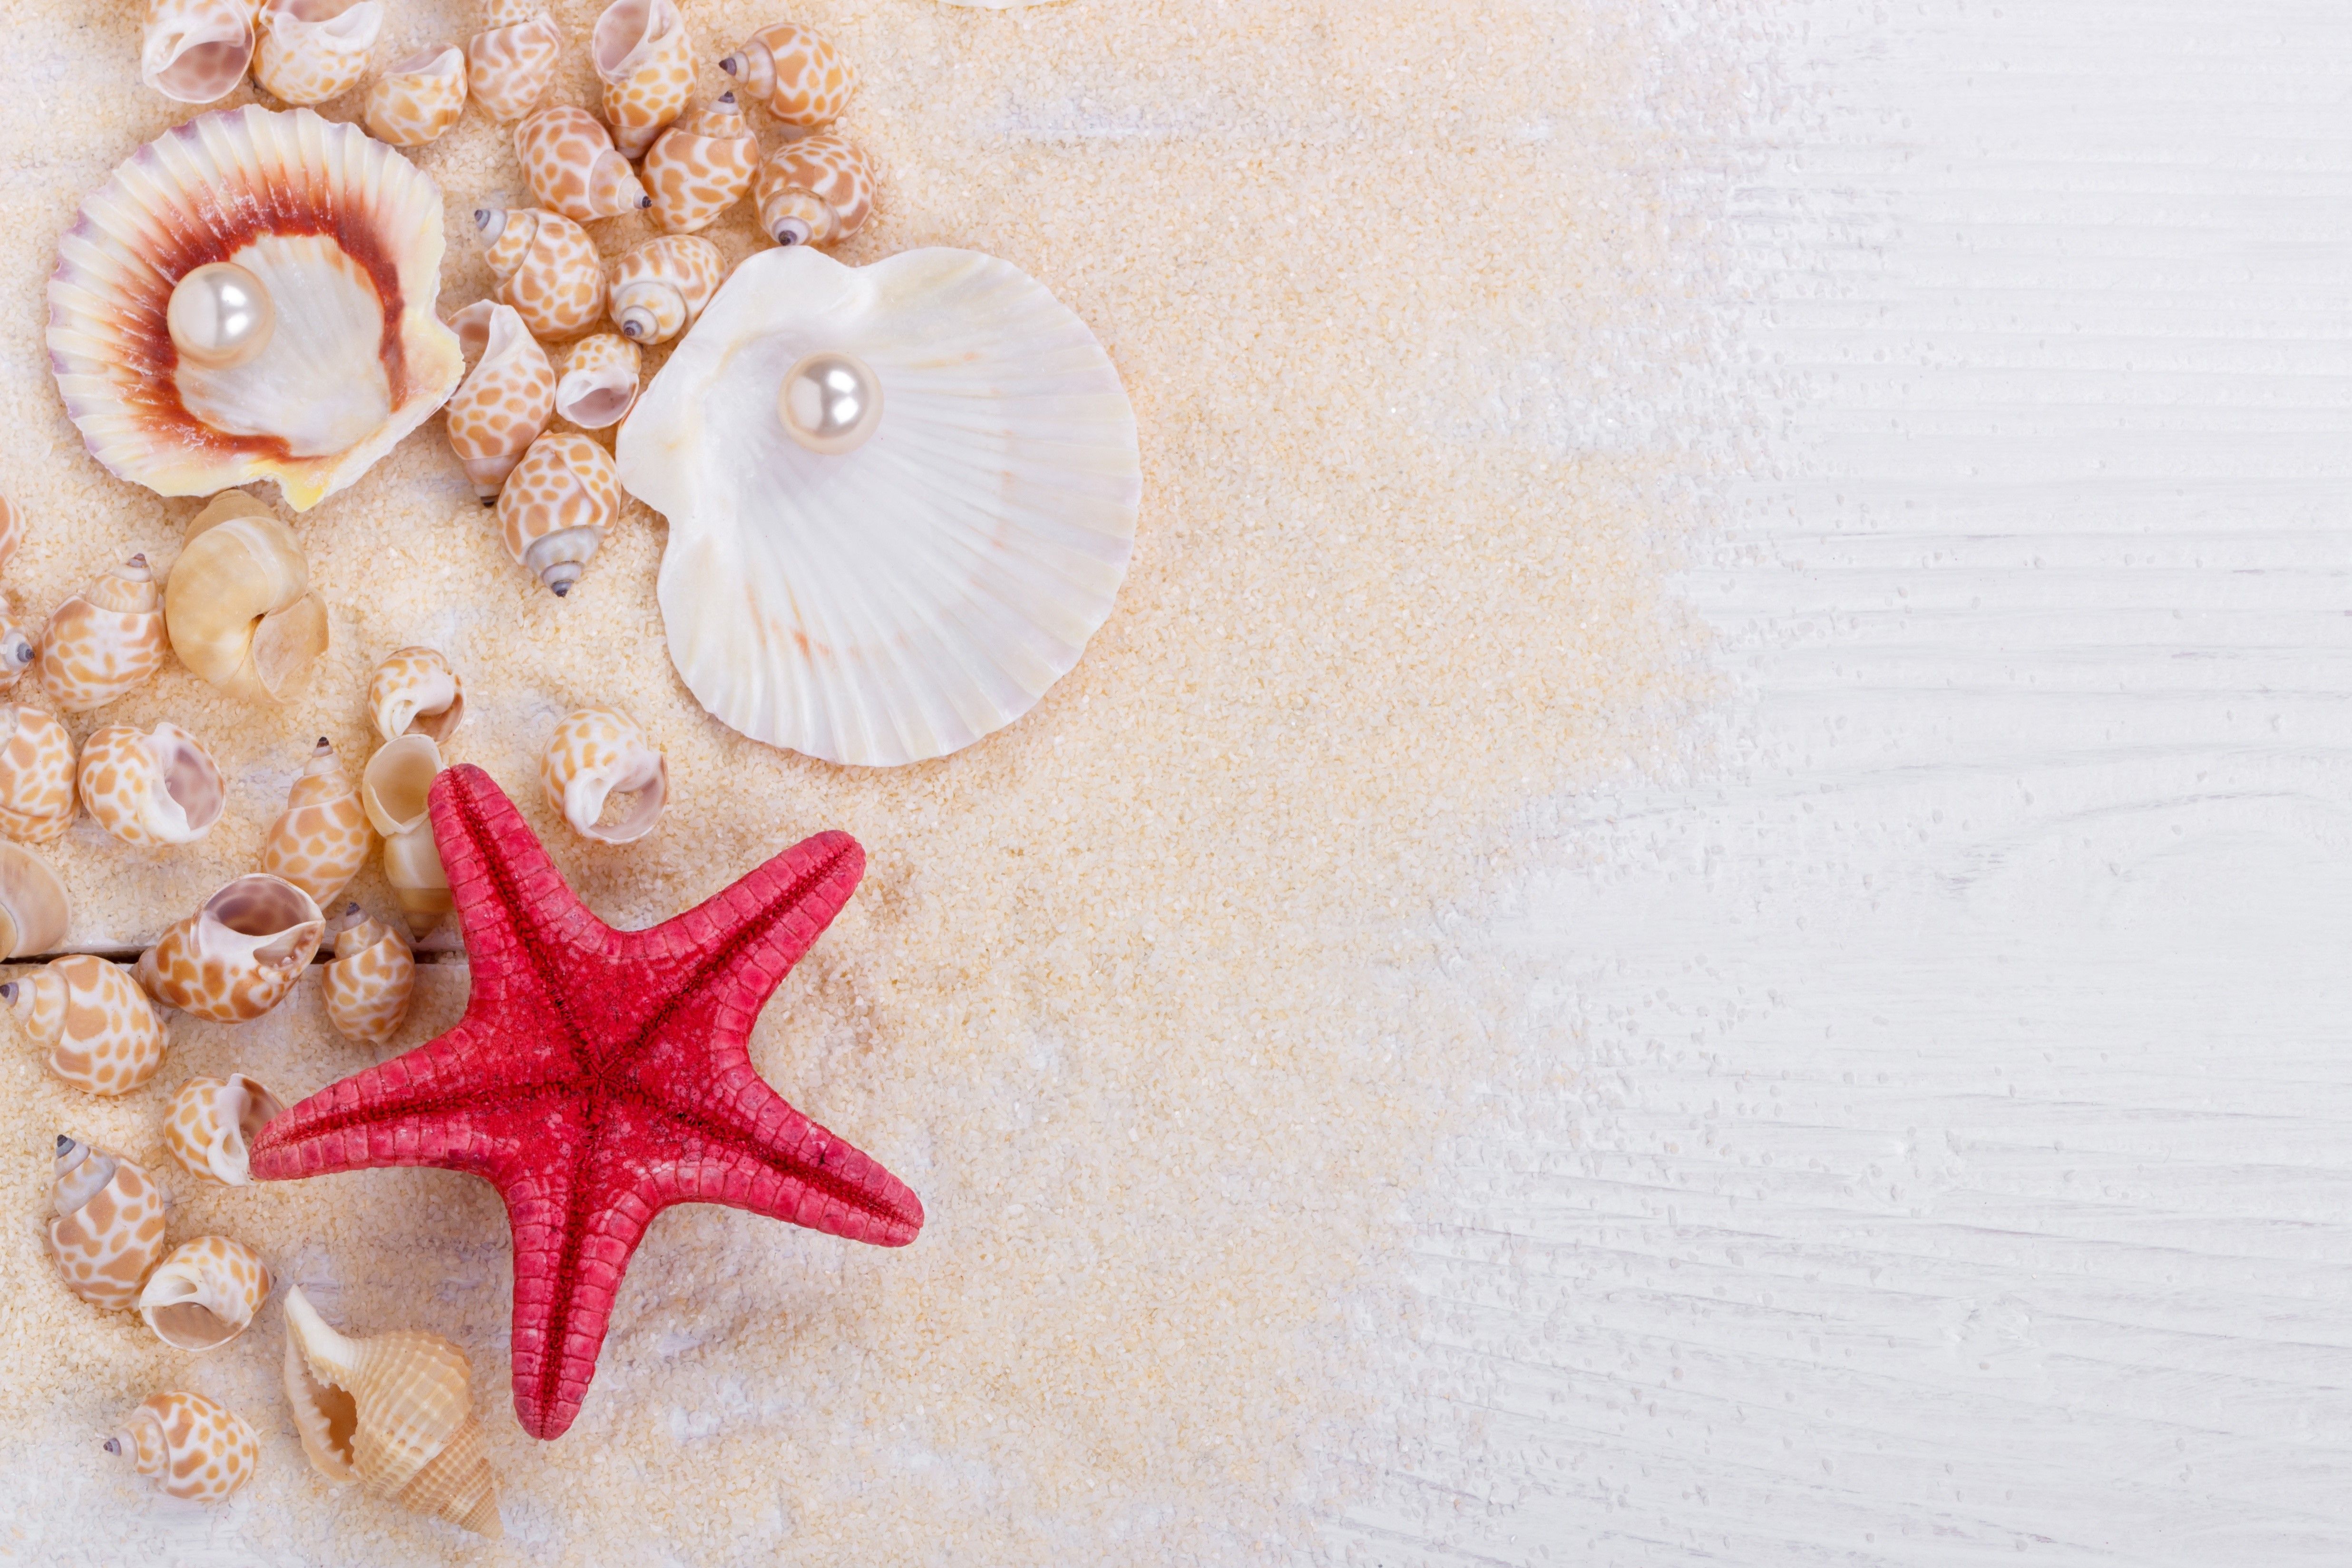 A red starfish and other shells on the beach - Starfish